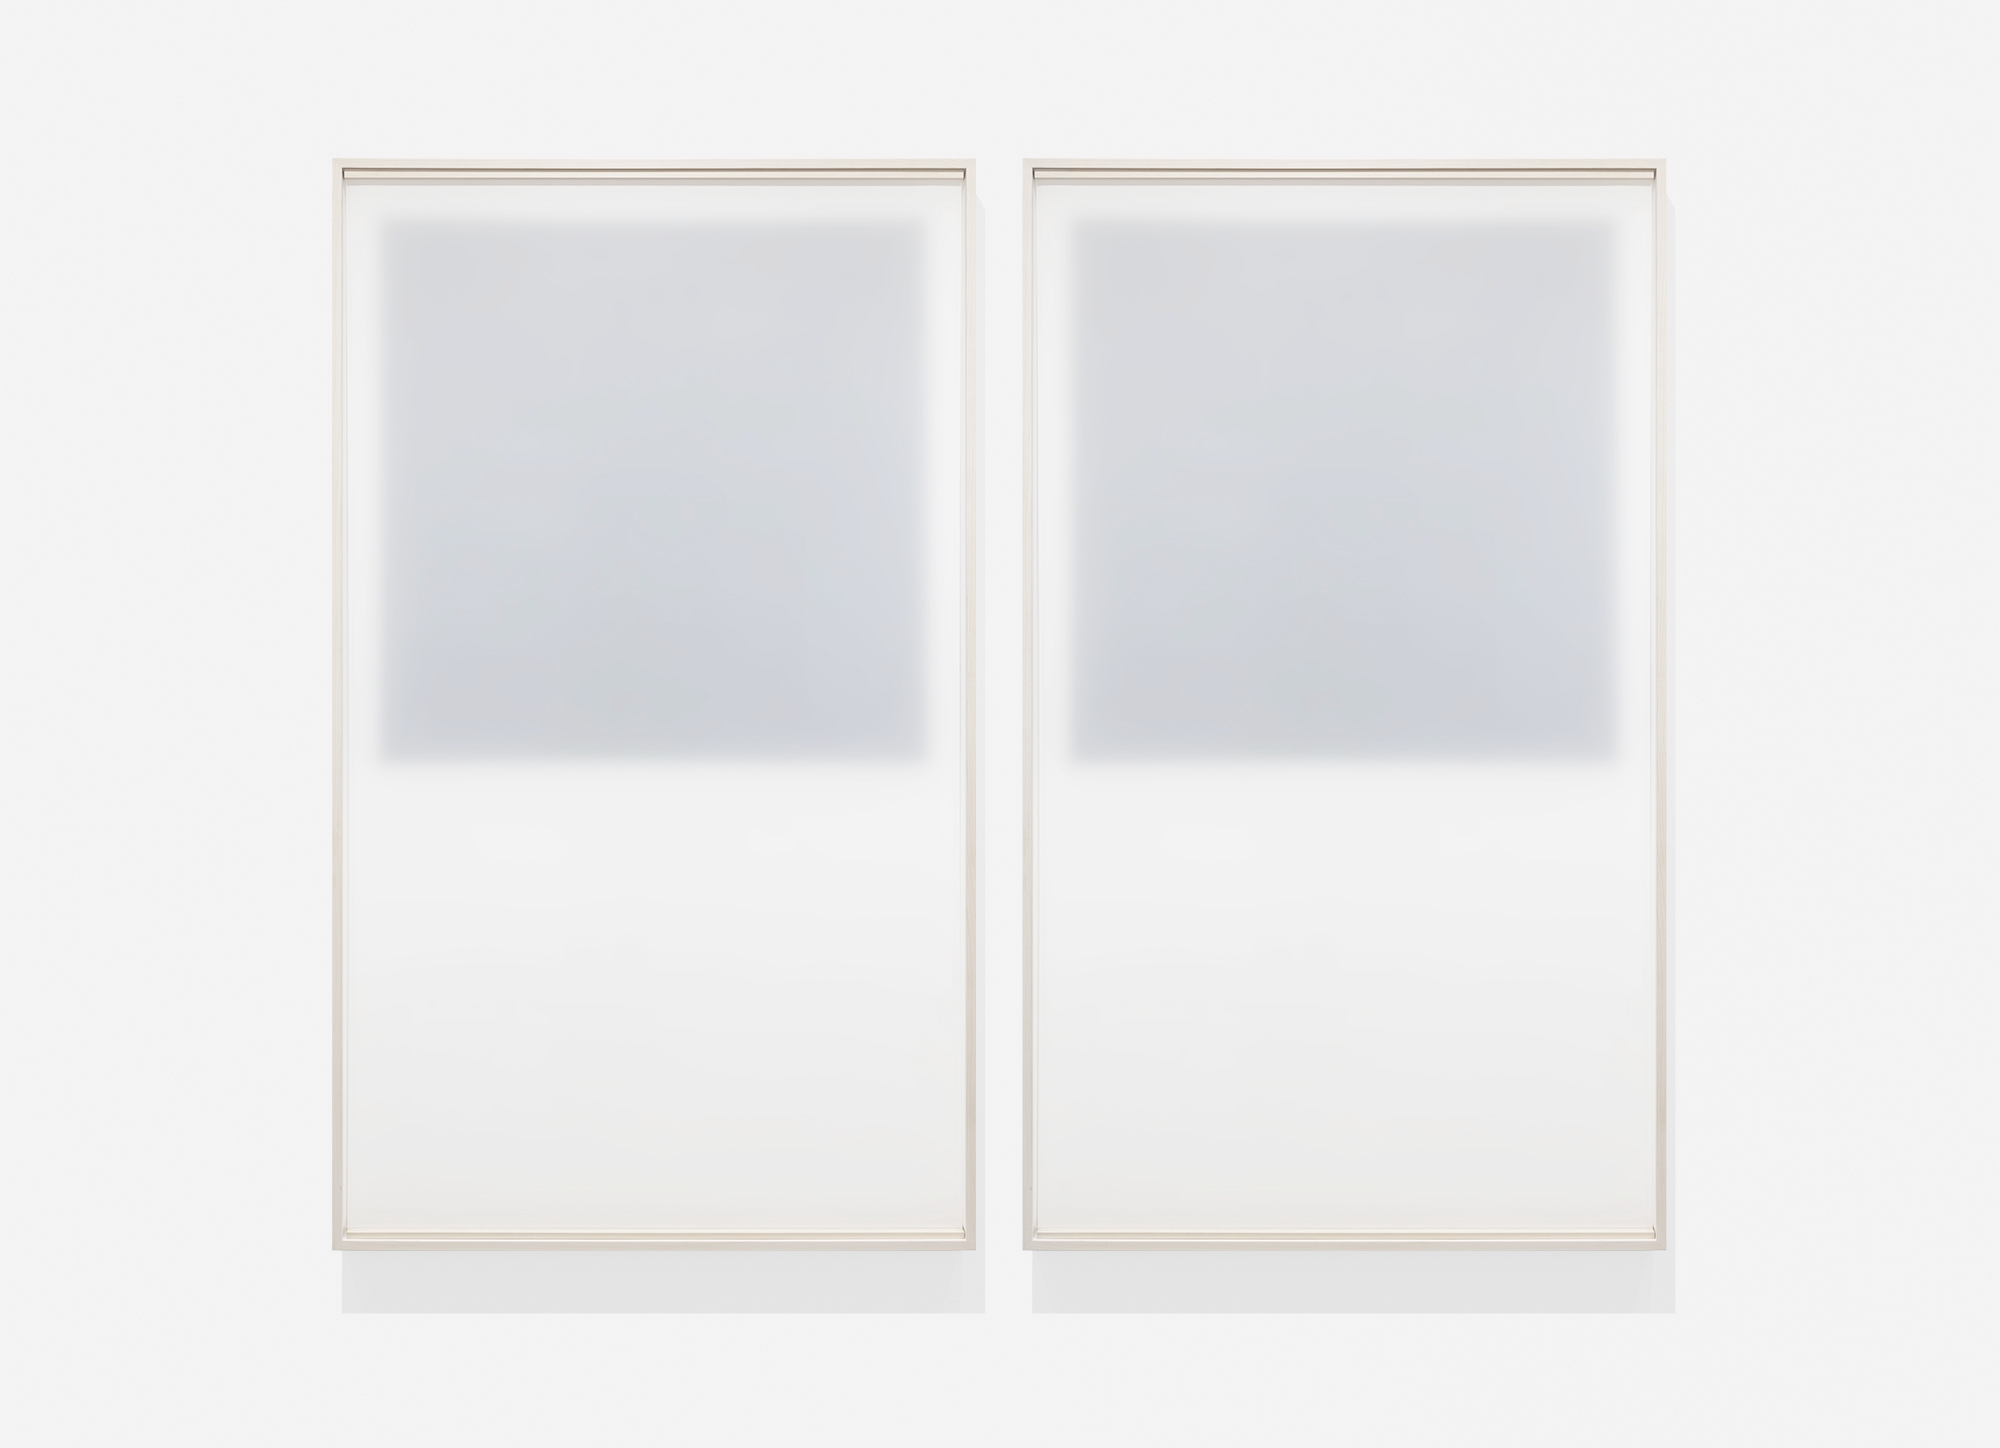   Untitled (a complicated clarity #1 and #2 / square),  2018, Frosted mylar suspended in front of black oil-based paint on mylar 70.5 x 41.5 inches each (framed)  